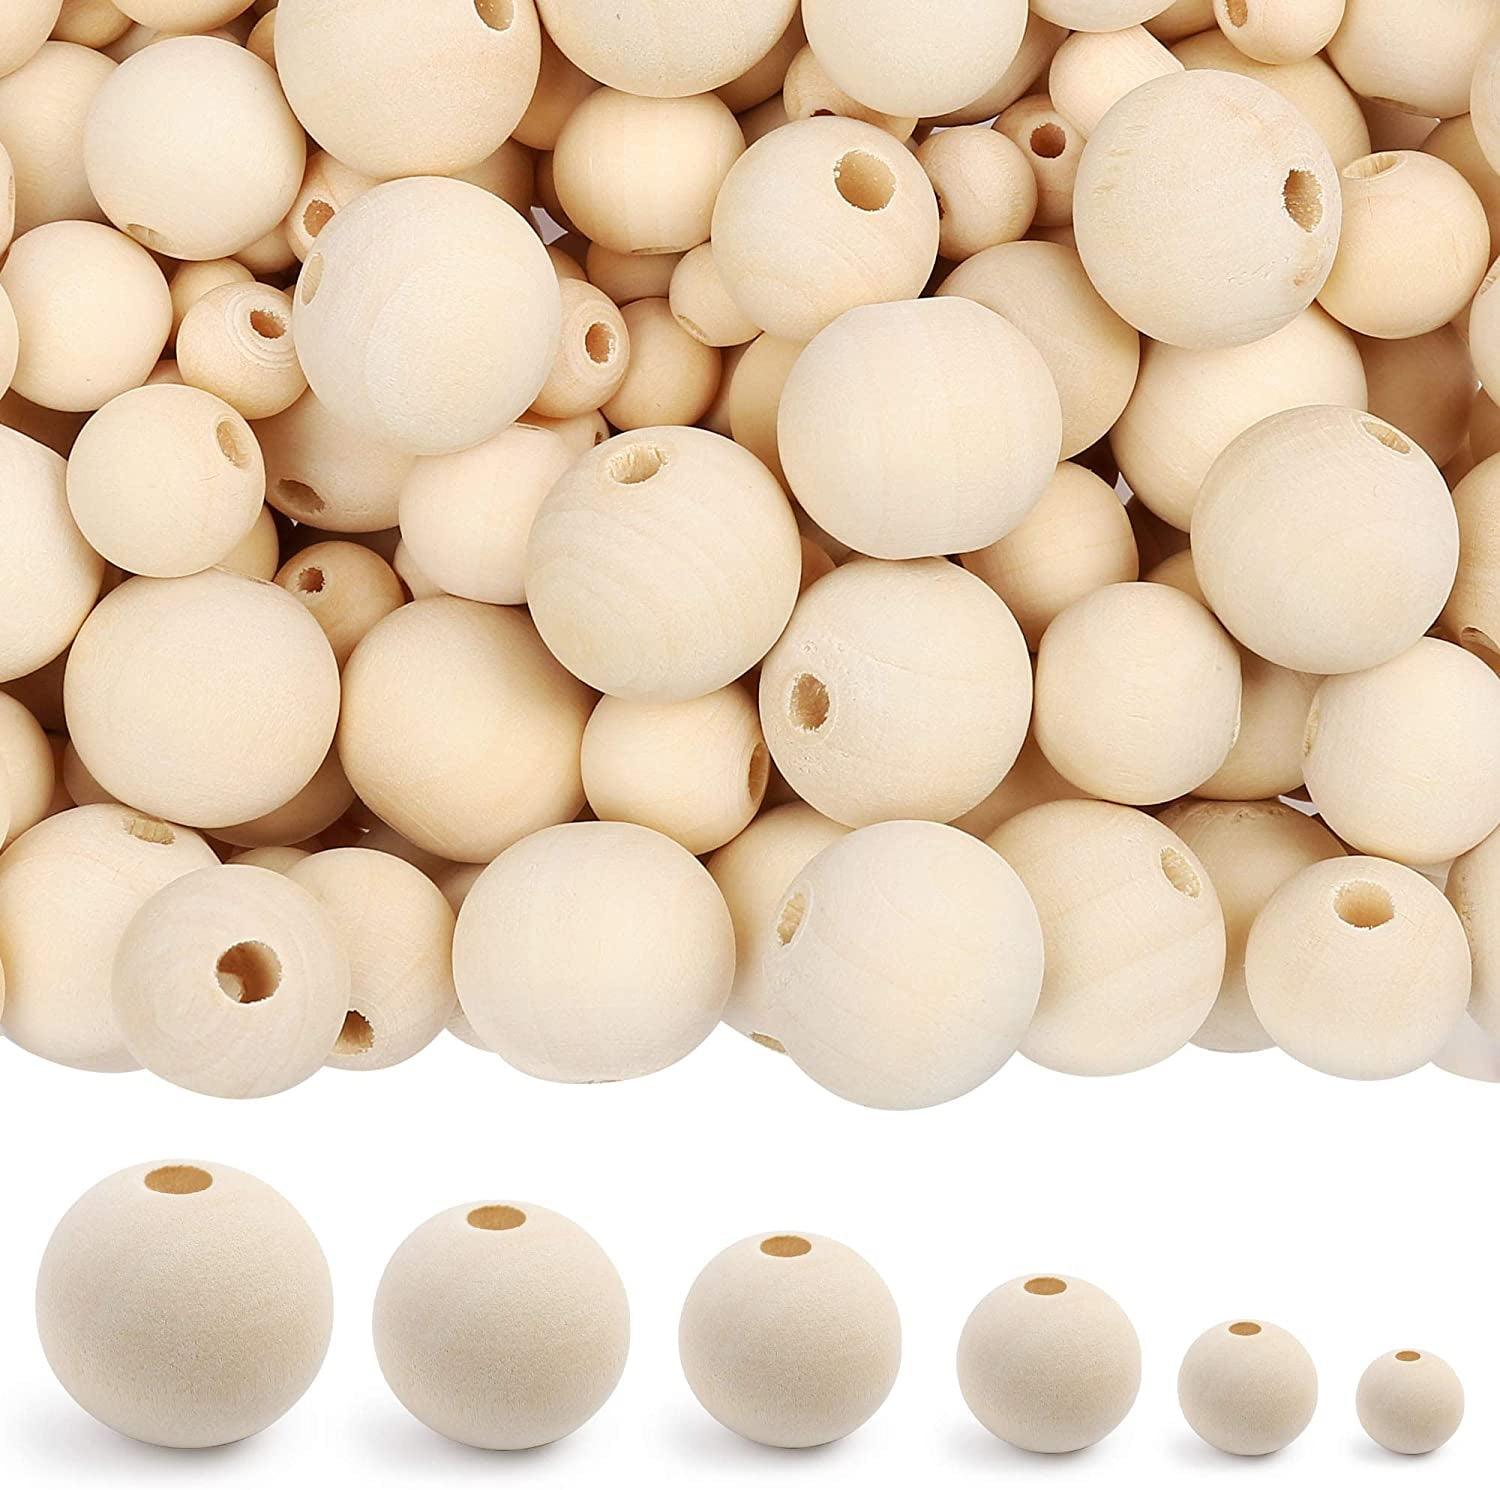 500Pcs Wooden Beads 6 Sizes Unfinished Natural Wood Crafts round Predrilled Balls Jewelry 8Mm 10Mm 12Mm 14Mm 16Mm 18Mm - WoodArtSupply